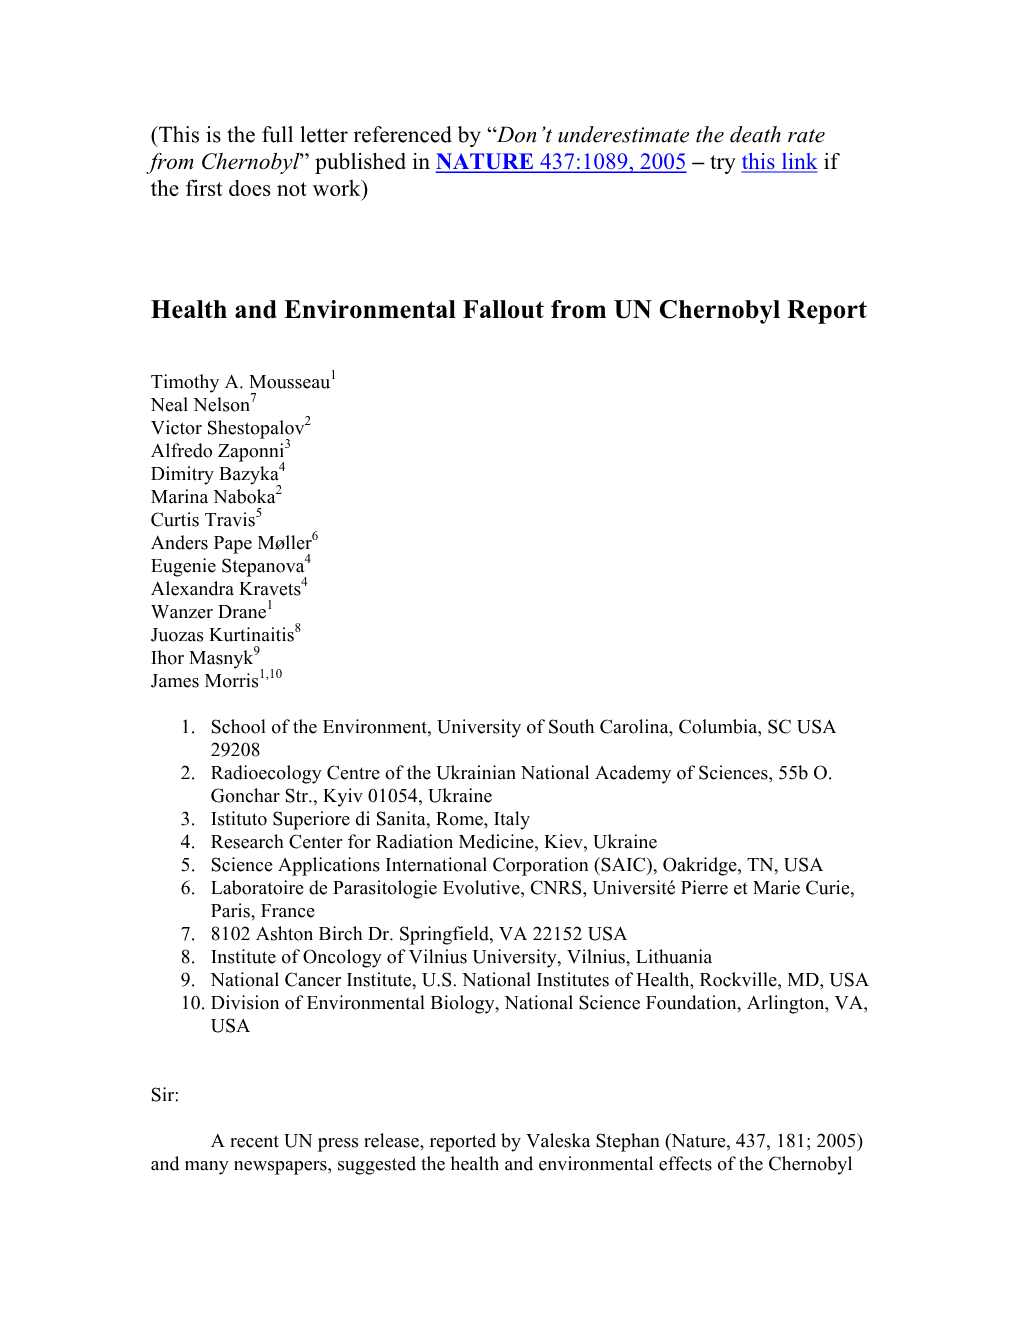 Health and Environmental Fallout from UN Chernobyl Report